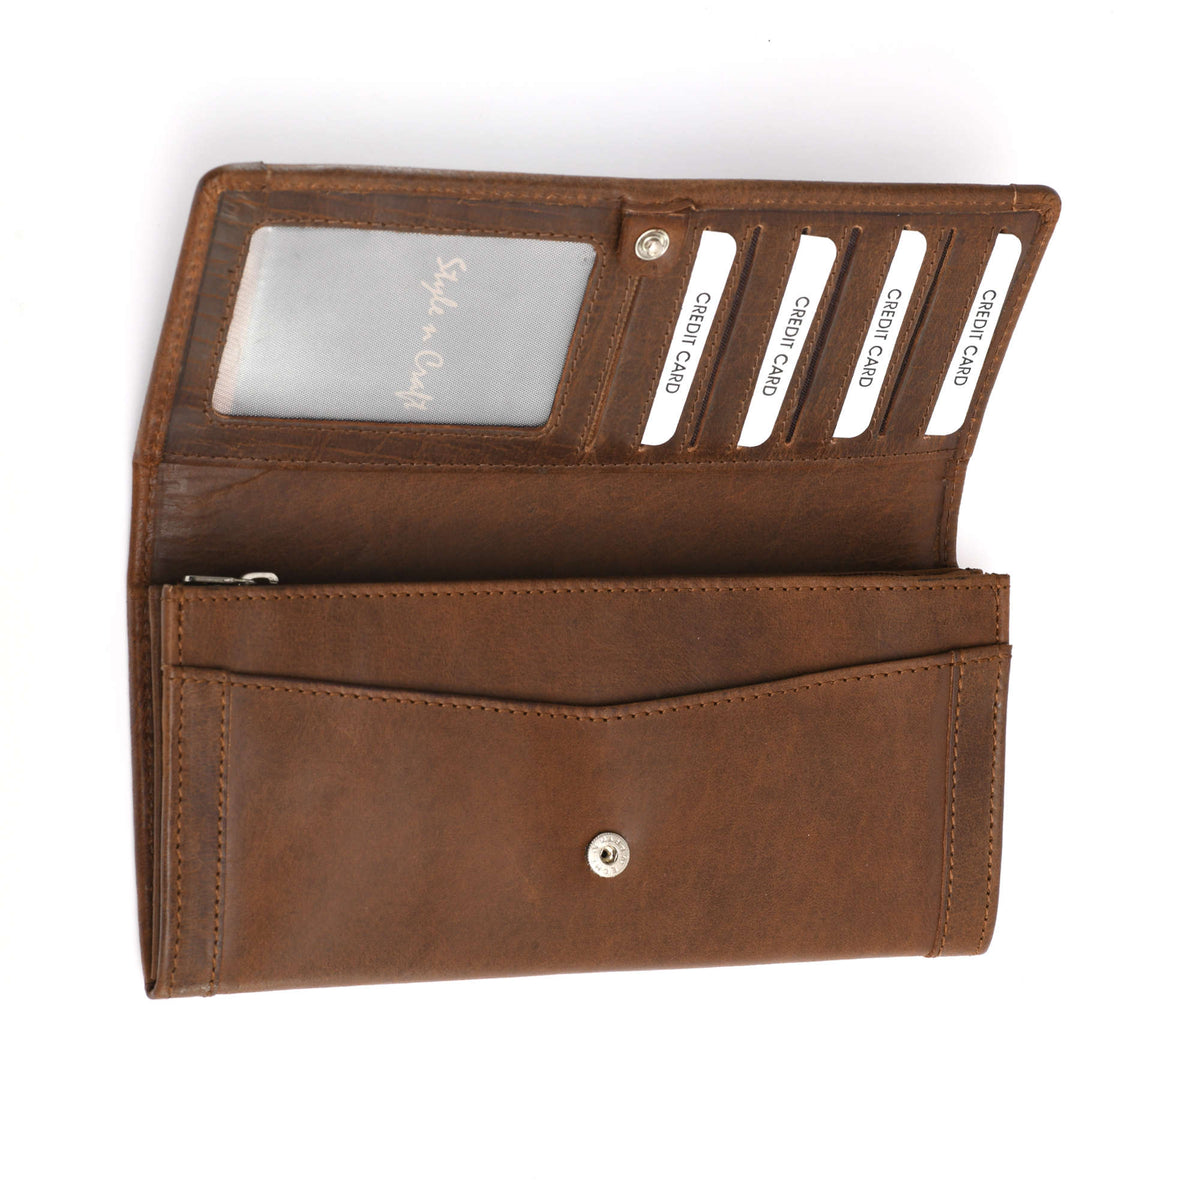 Long Clutch Wallet in Oak Color | Leather Frame | Style n Craft | #391106